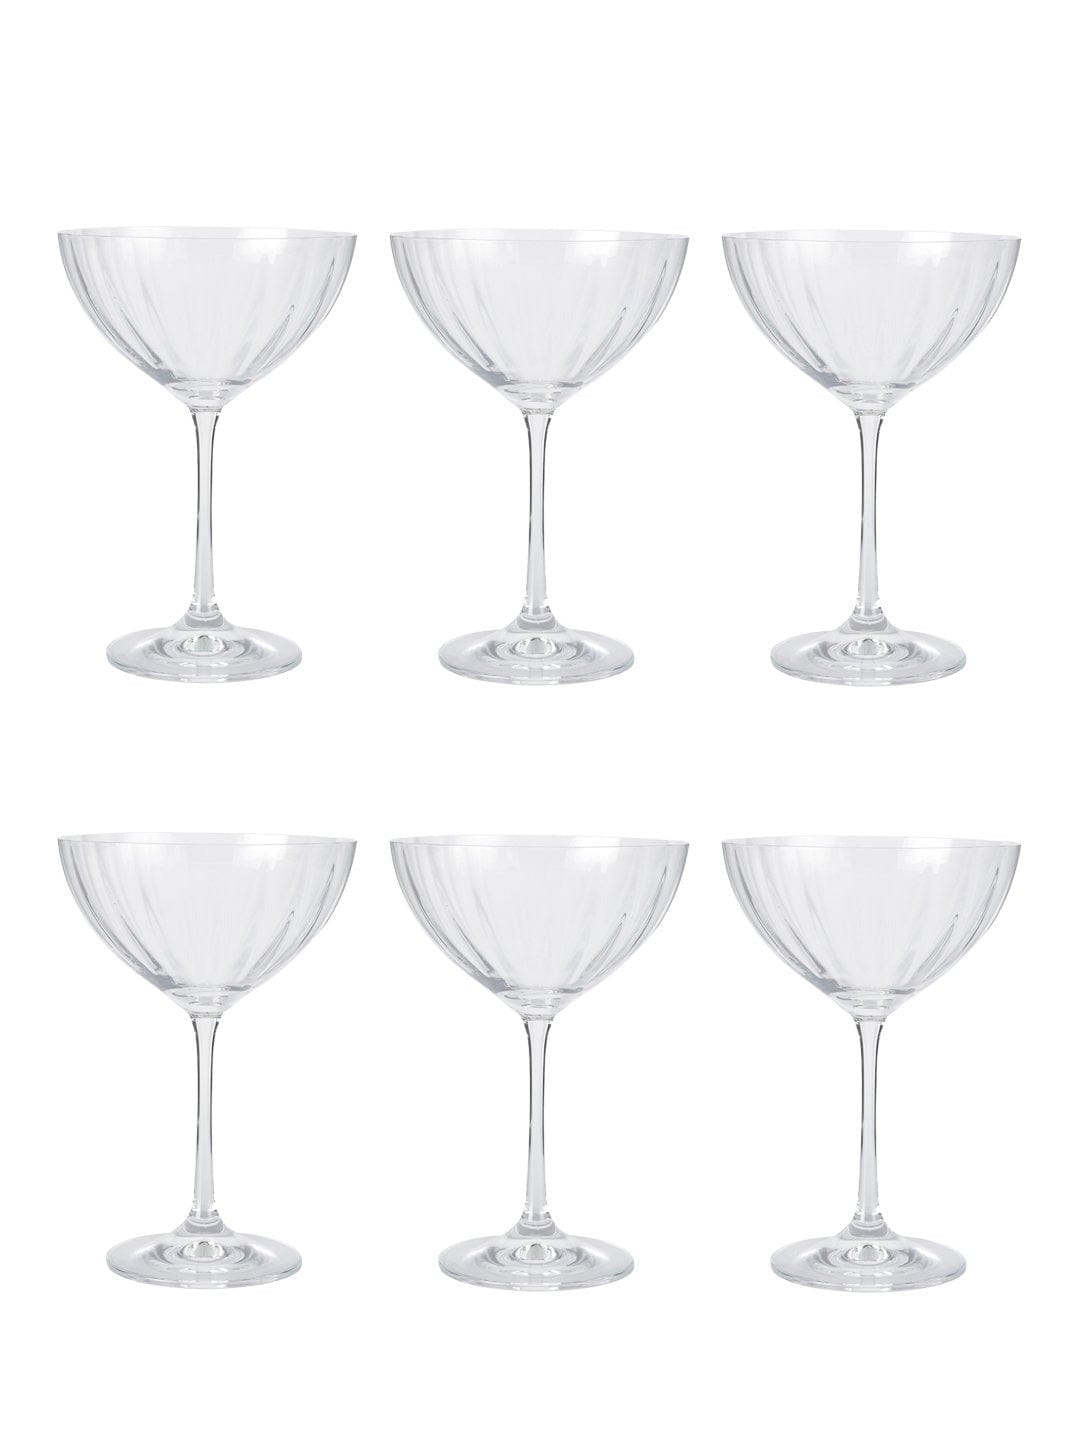 Bohemia Crystal Waterfall Cocktail Glass 340ML set of 6 pcs , Transparent , Non - lead Crystal | Cocktail Glass